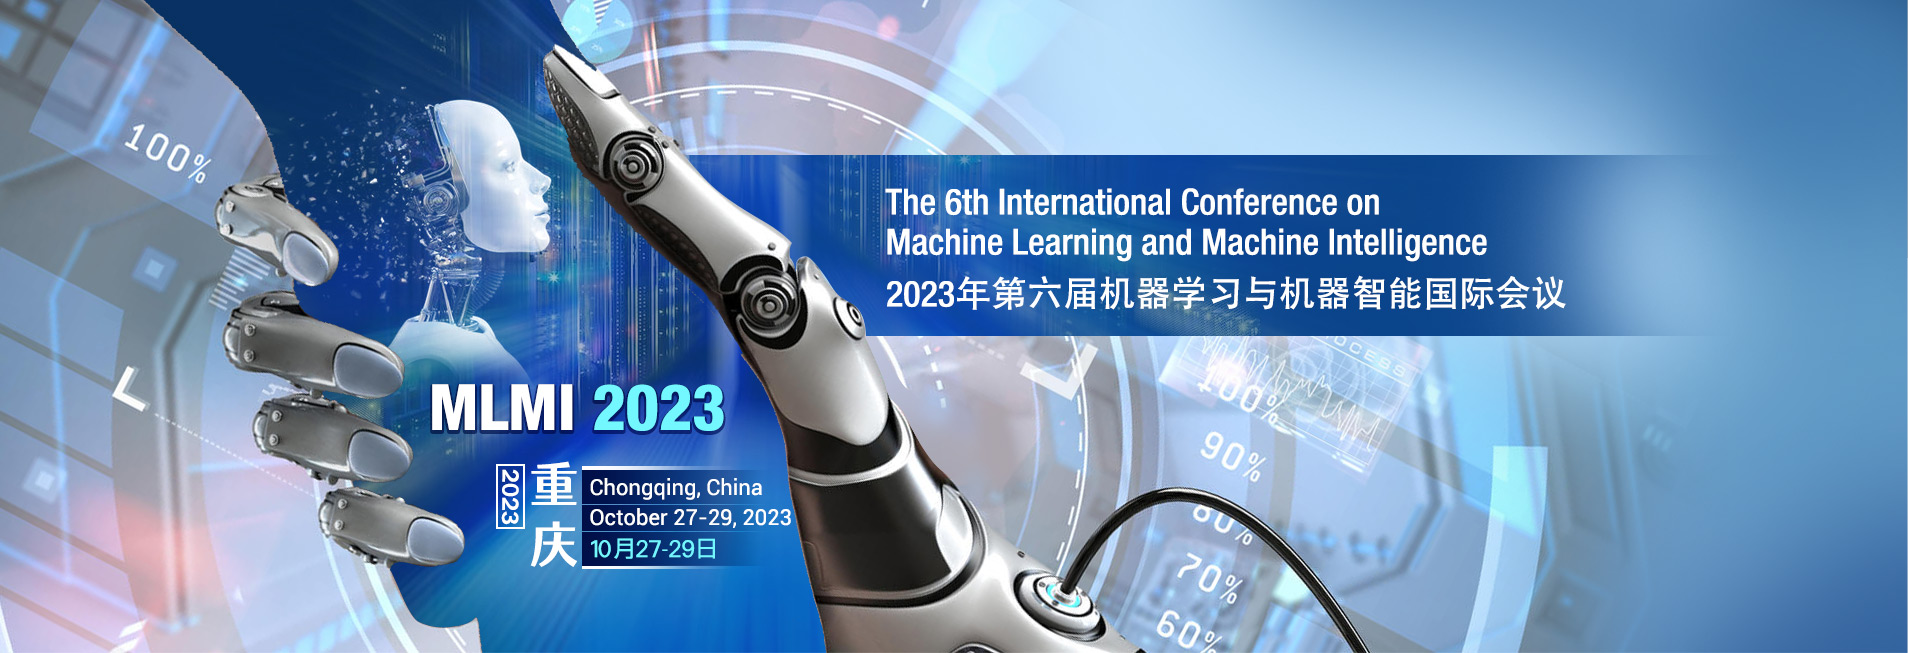 The 6th International Conference on Machine Learning and Machine Intelligence MLMI 2023